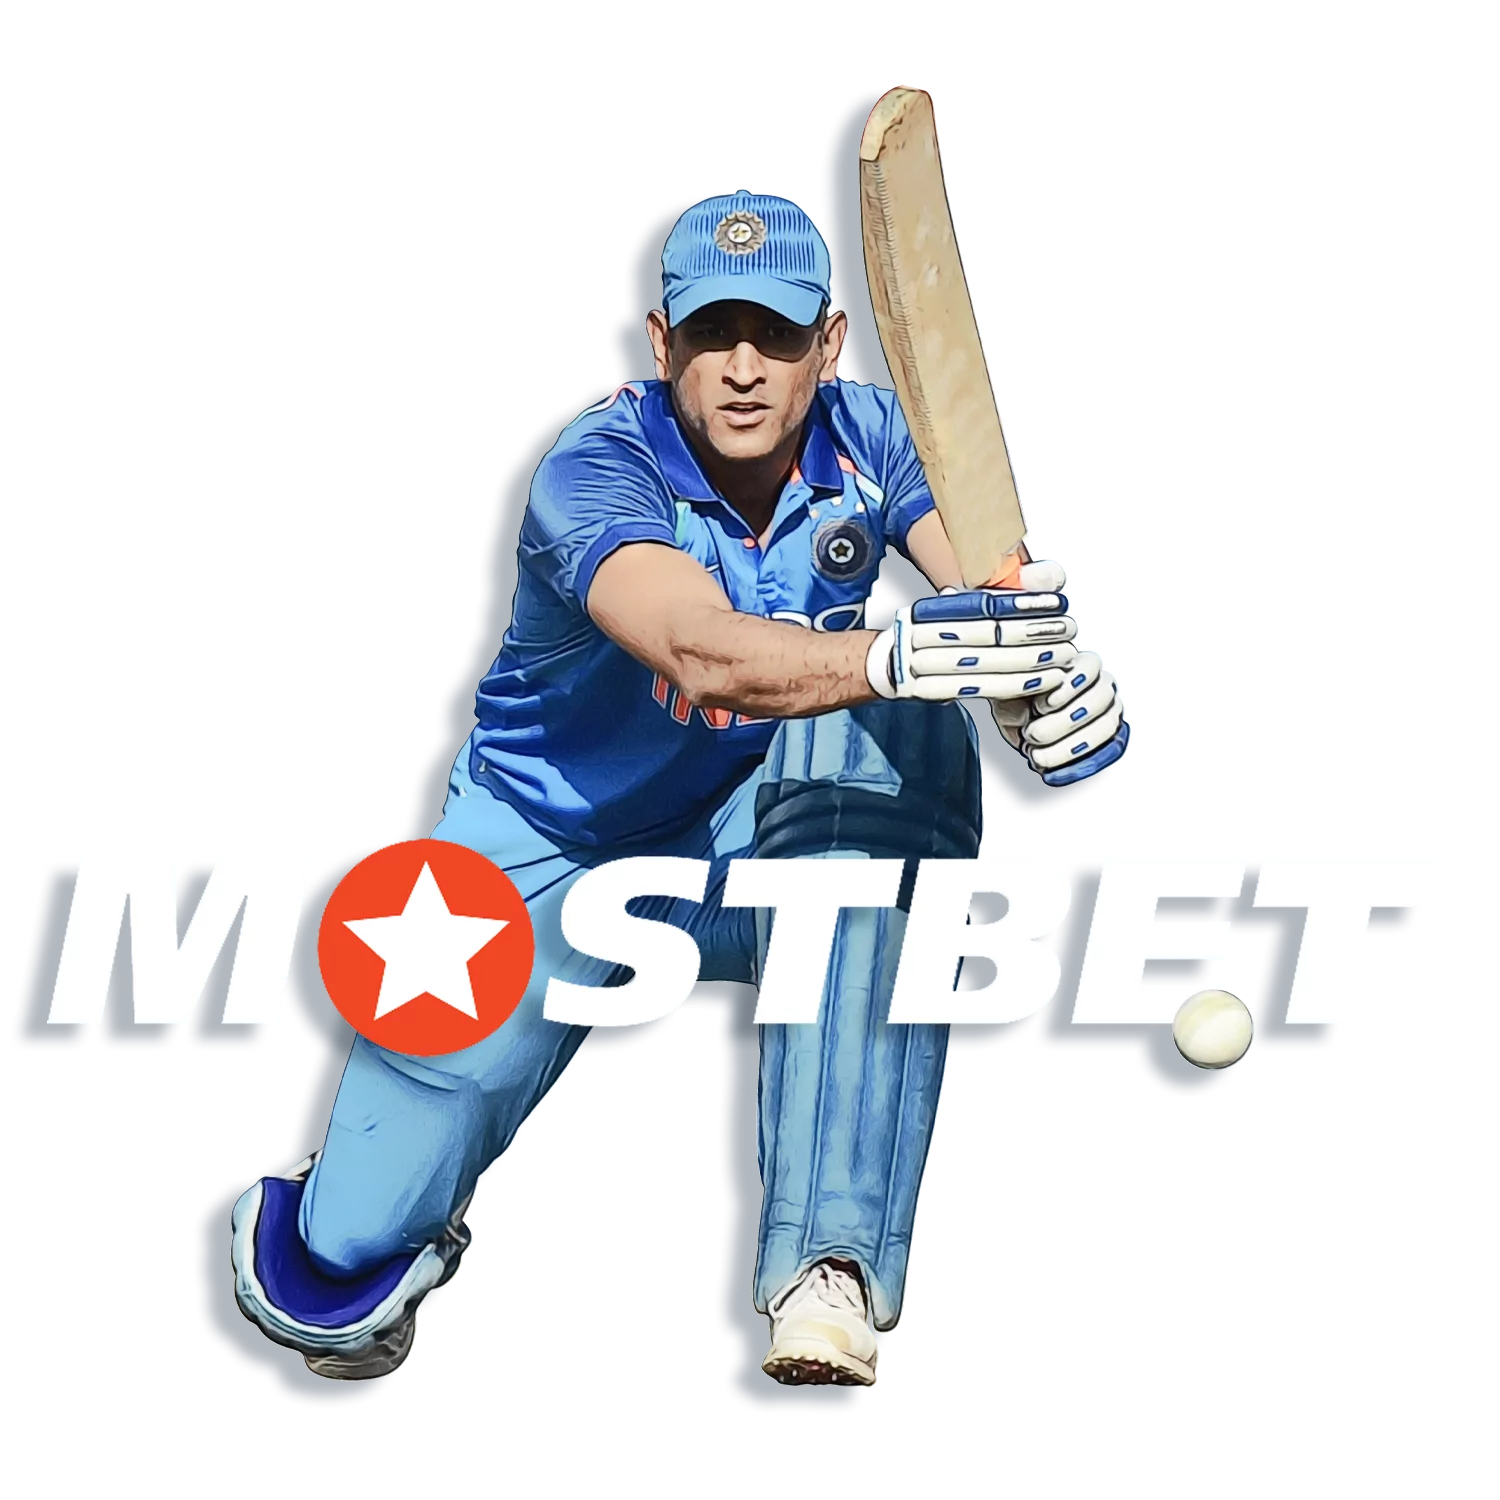 Mostbet Company - Start betting on cricket online with a bounty of up to INR 25,000.